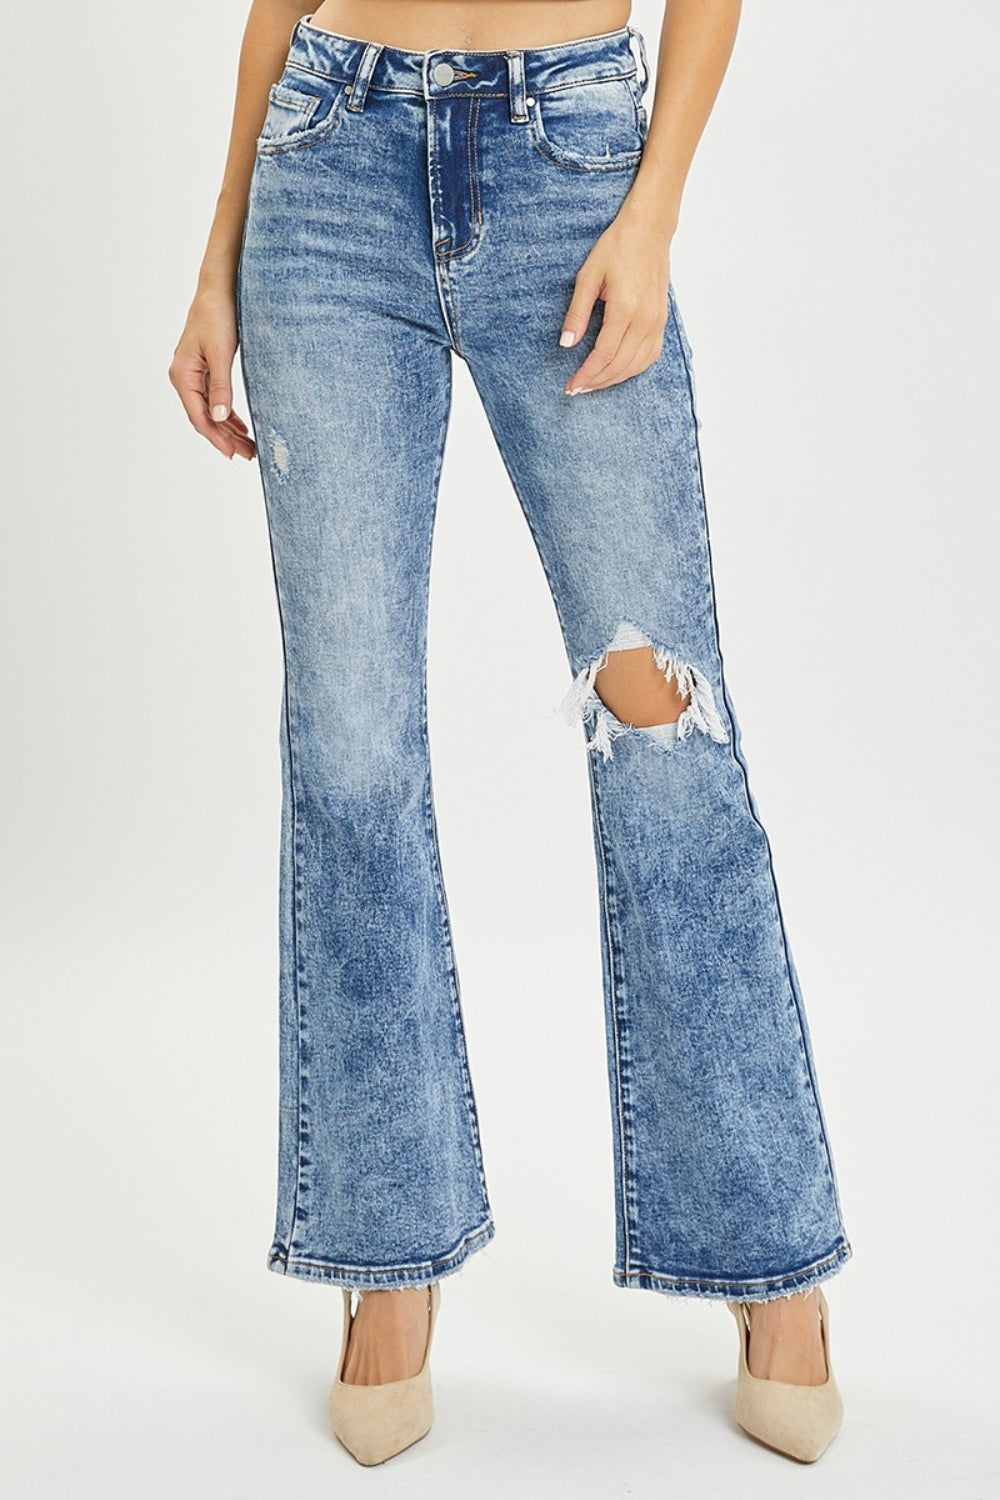 RISEN High Rise Acid Wash Distressed Flare Jeans